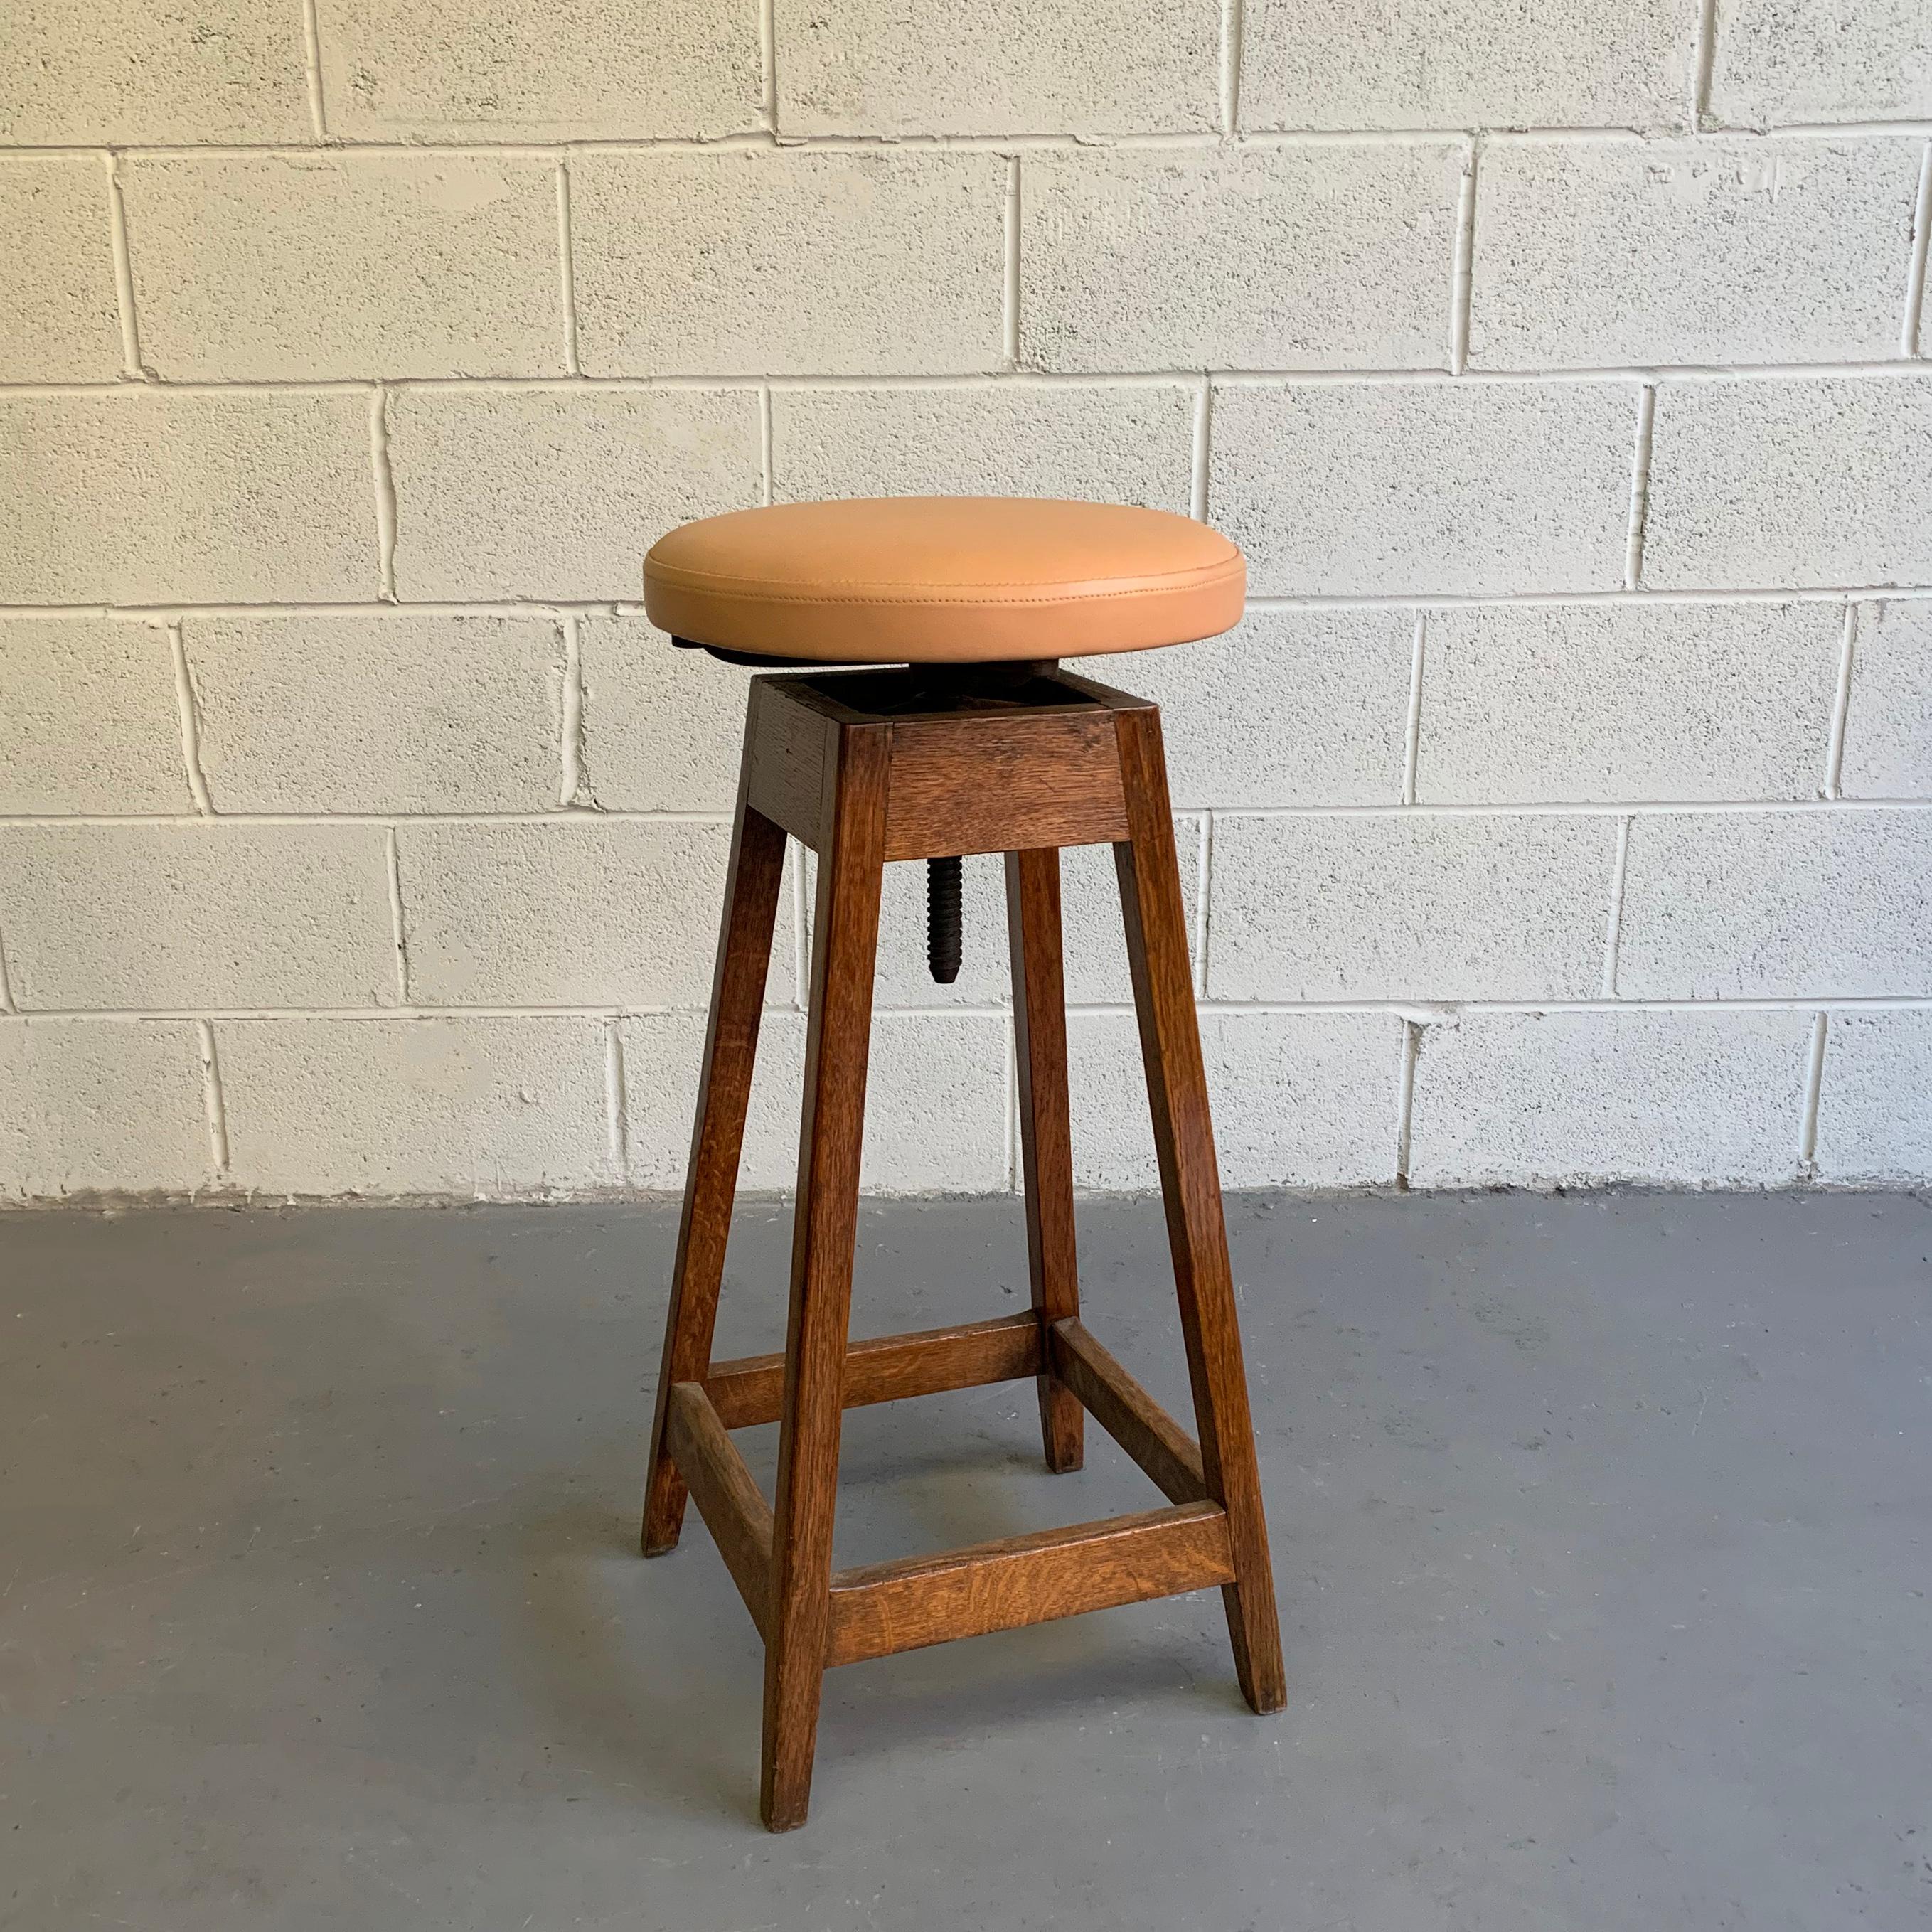 American Industrial Adjustable Oak Shop Stool With Leather Seat For Sale